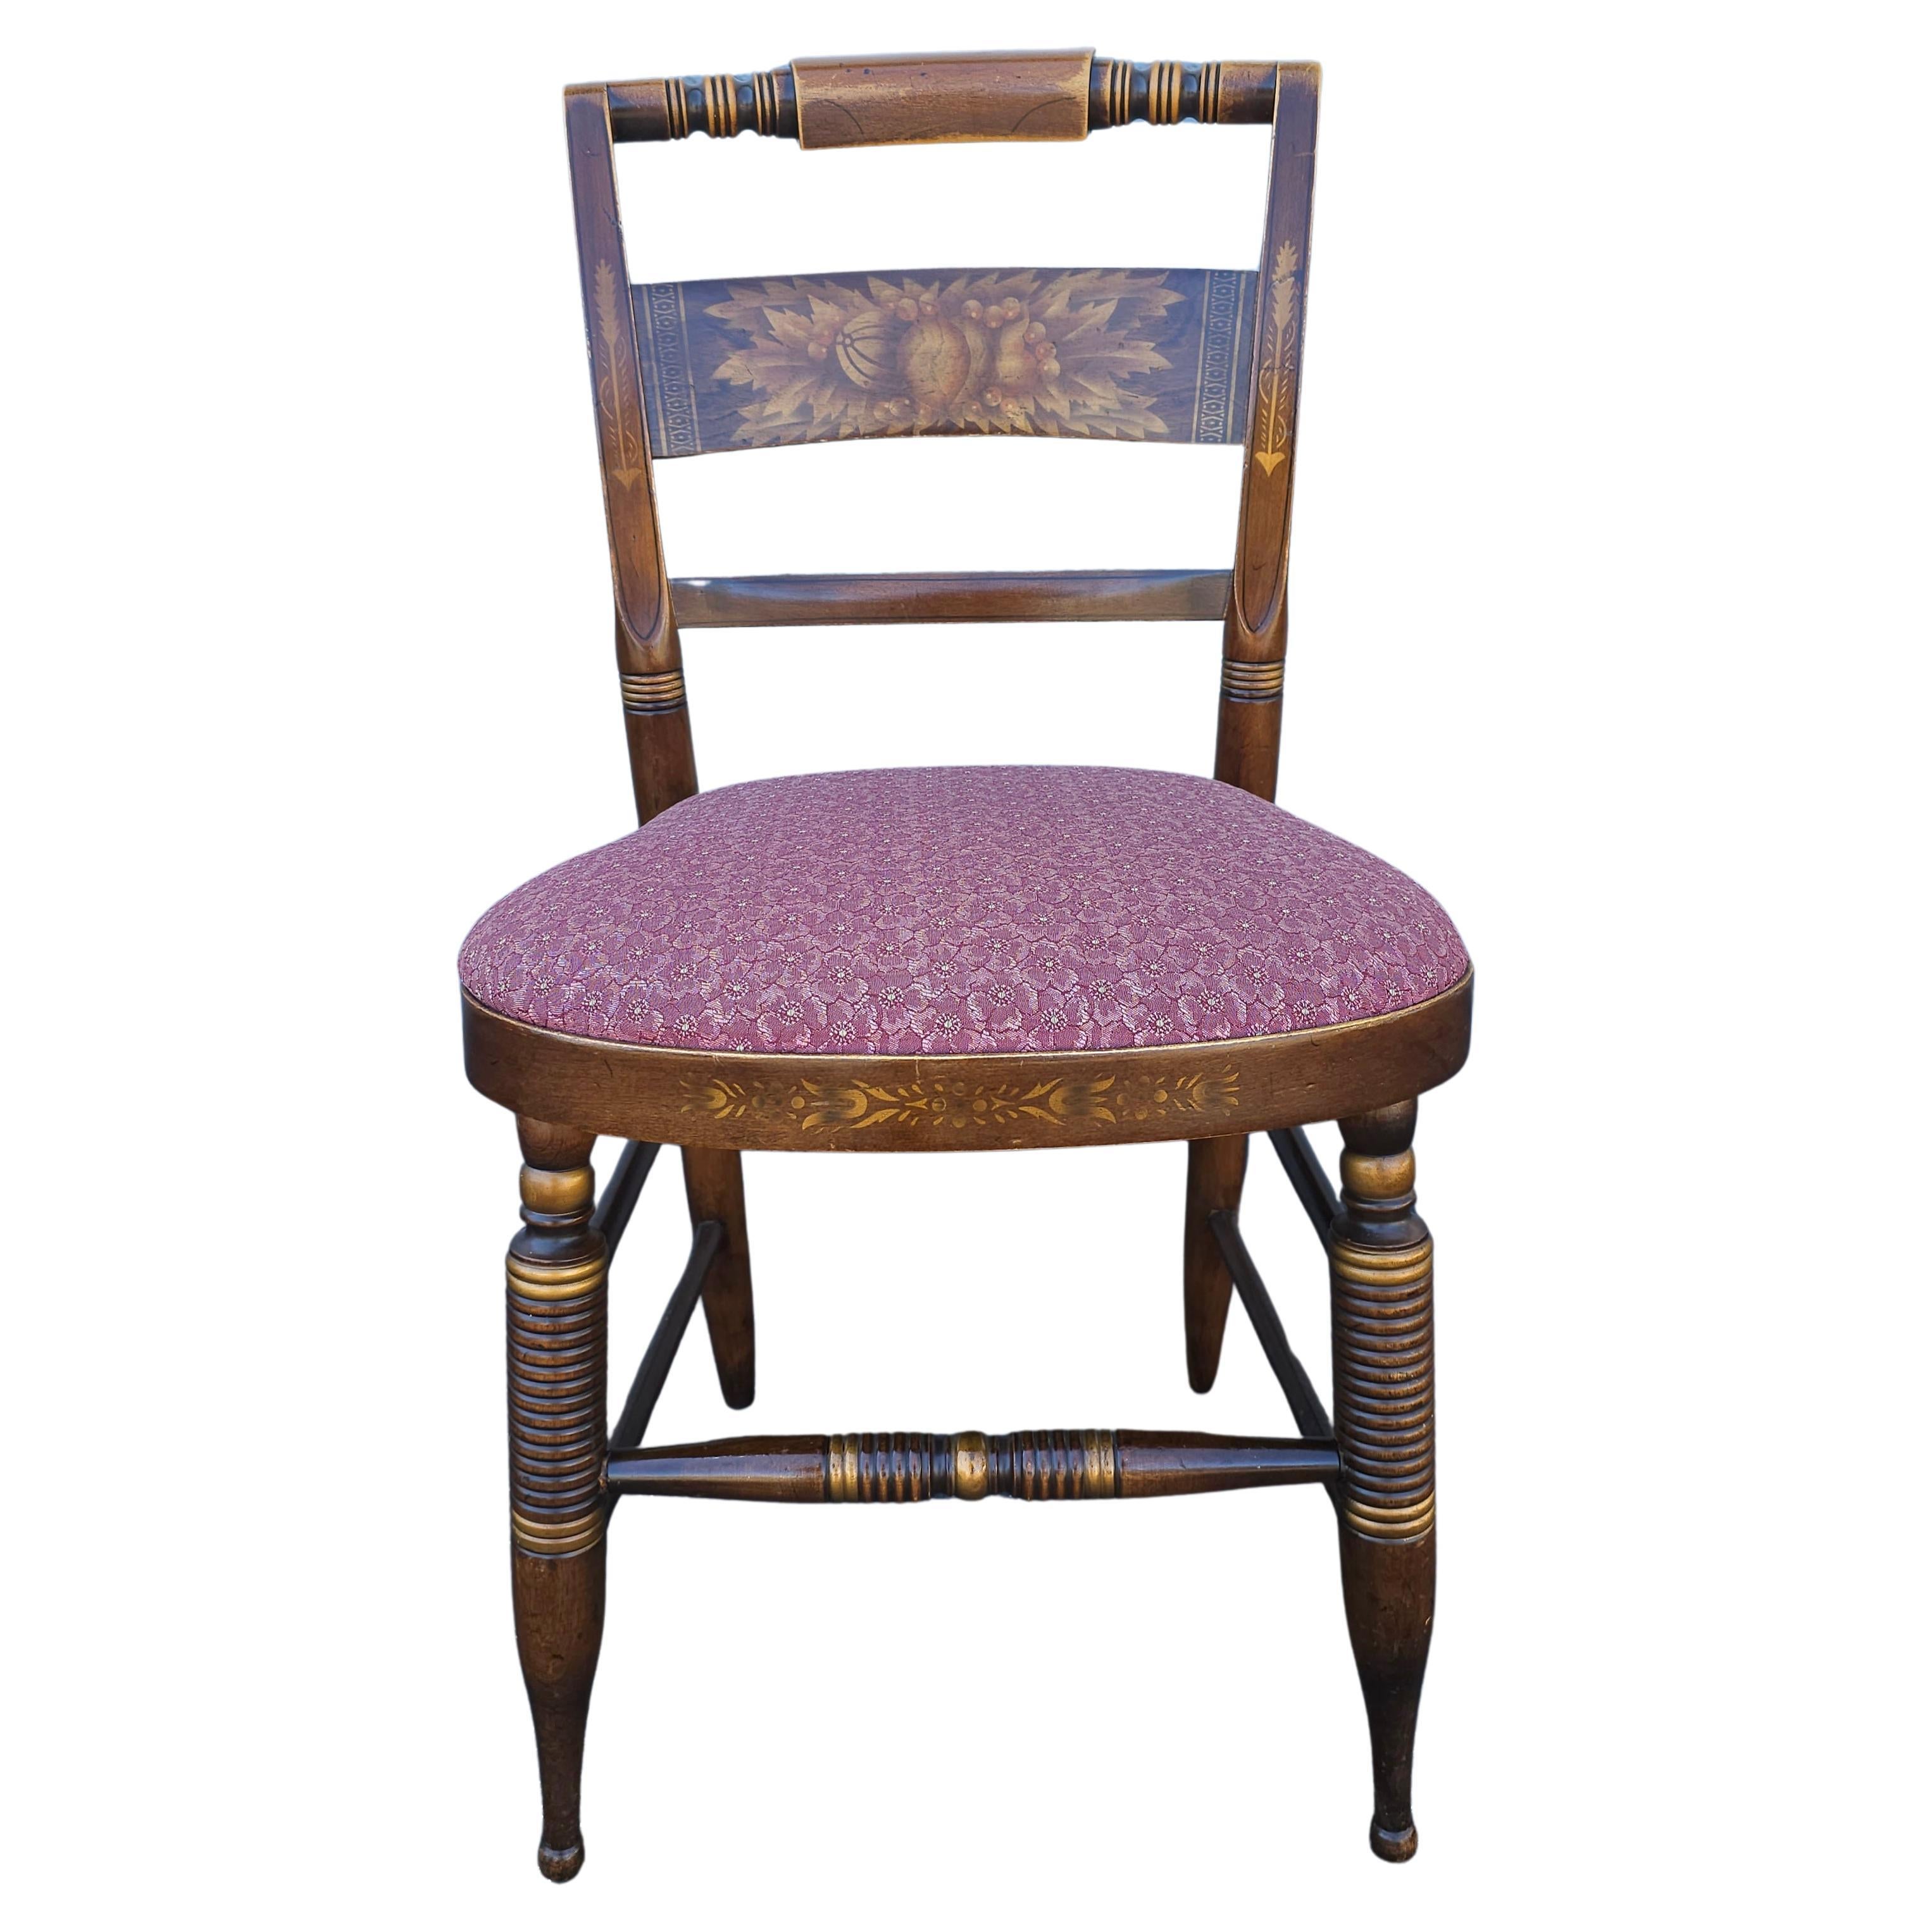 Late 20th C. Hitchcock Partial Gilt and Decorated Upholstered Seat Side Chair For Sale